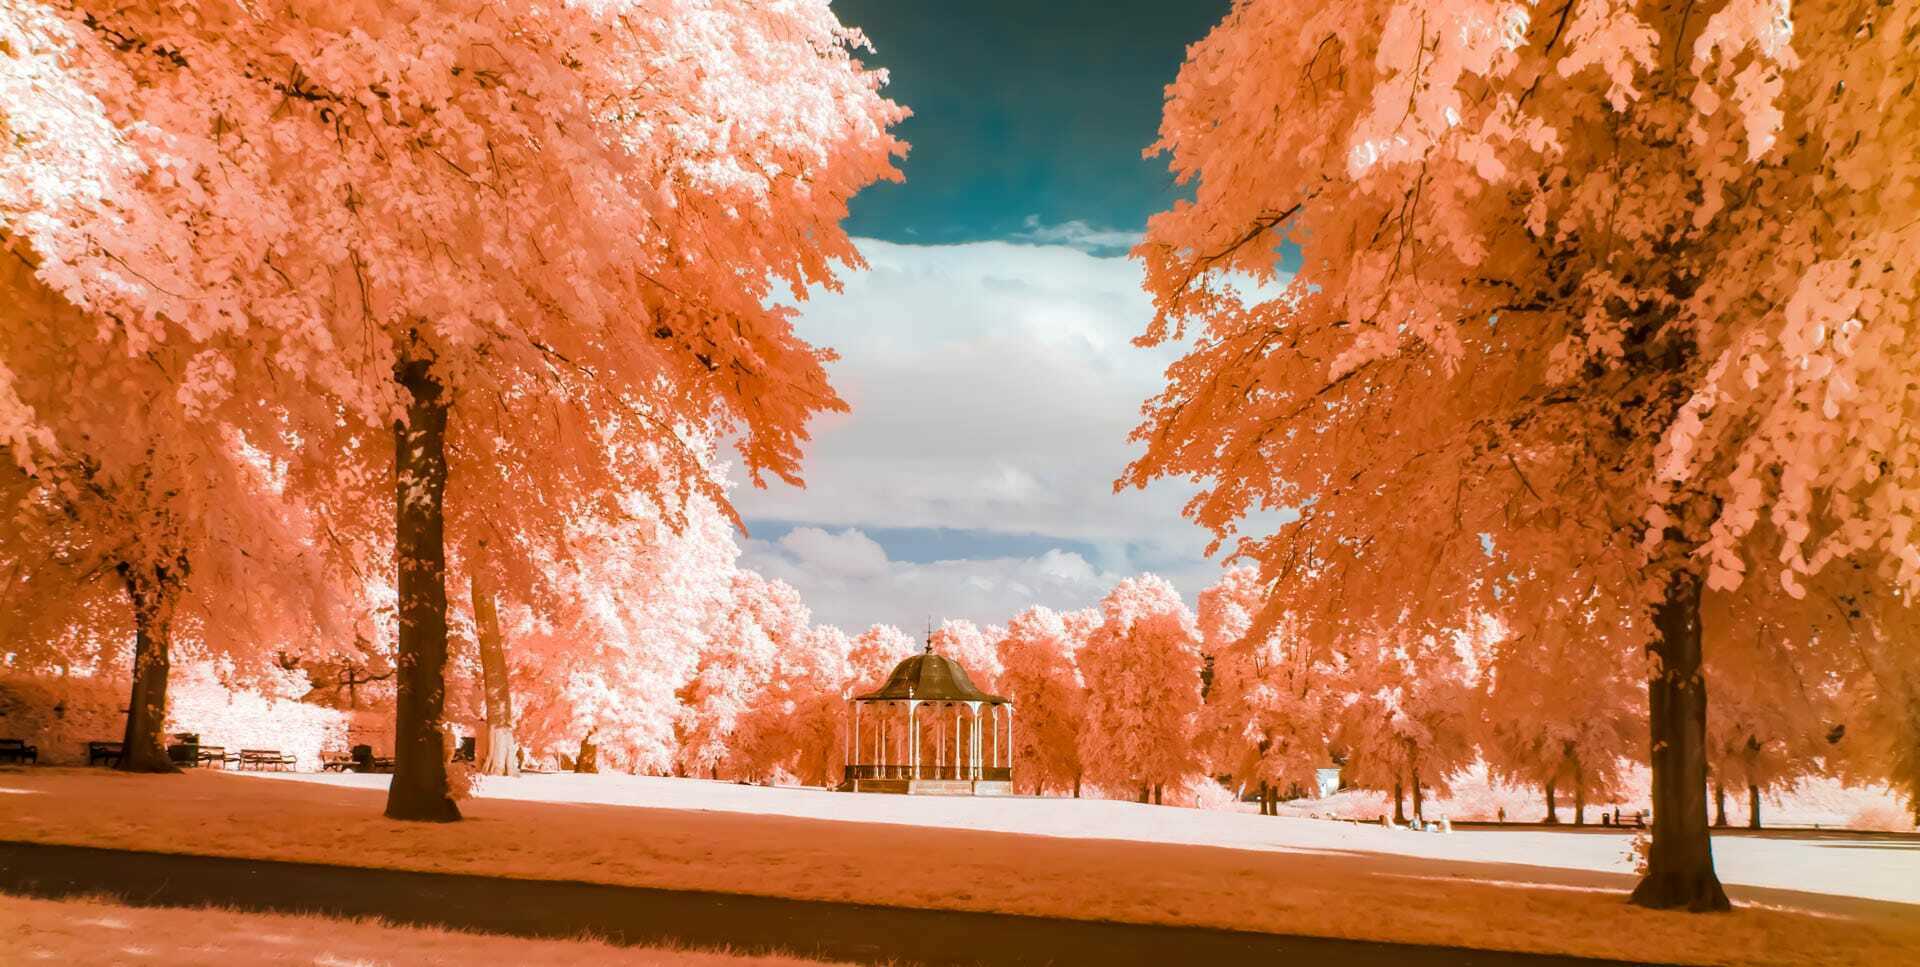 Infrared Photography Processing